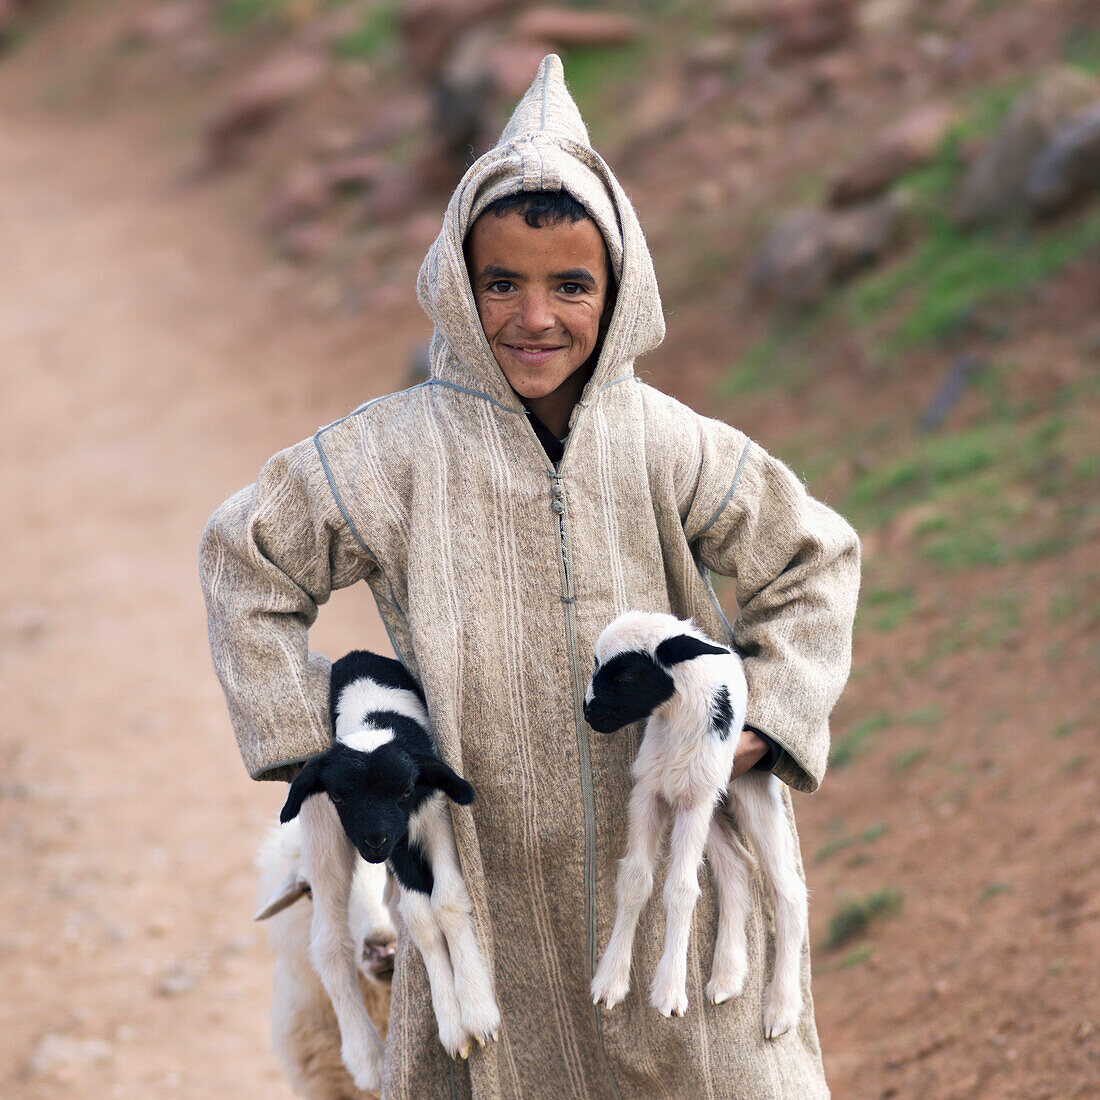 'A Young Shepherd Boy Holding Two Lambs; Morocco'